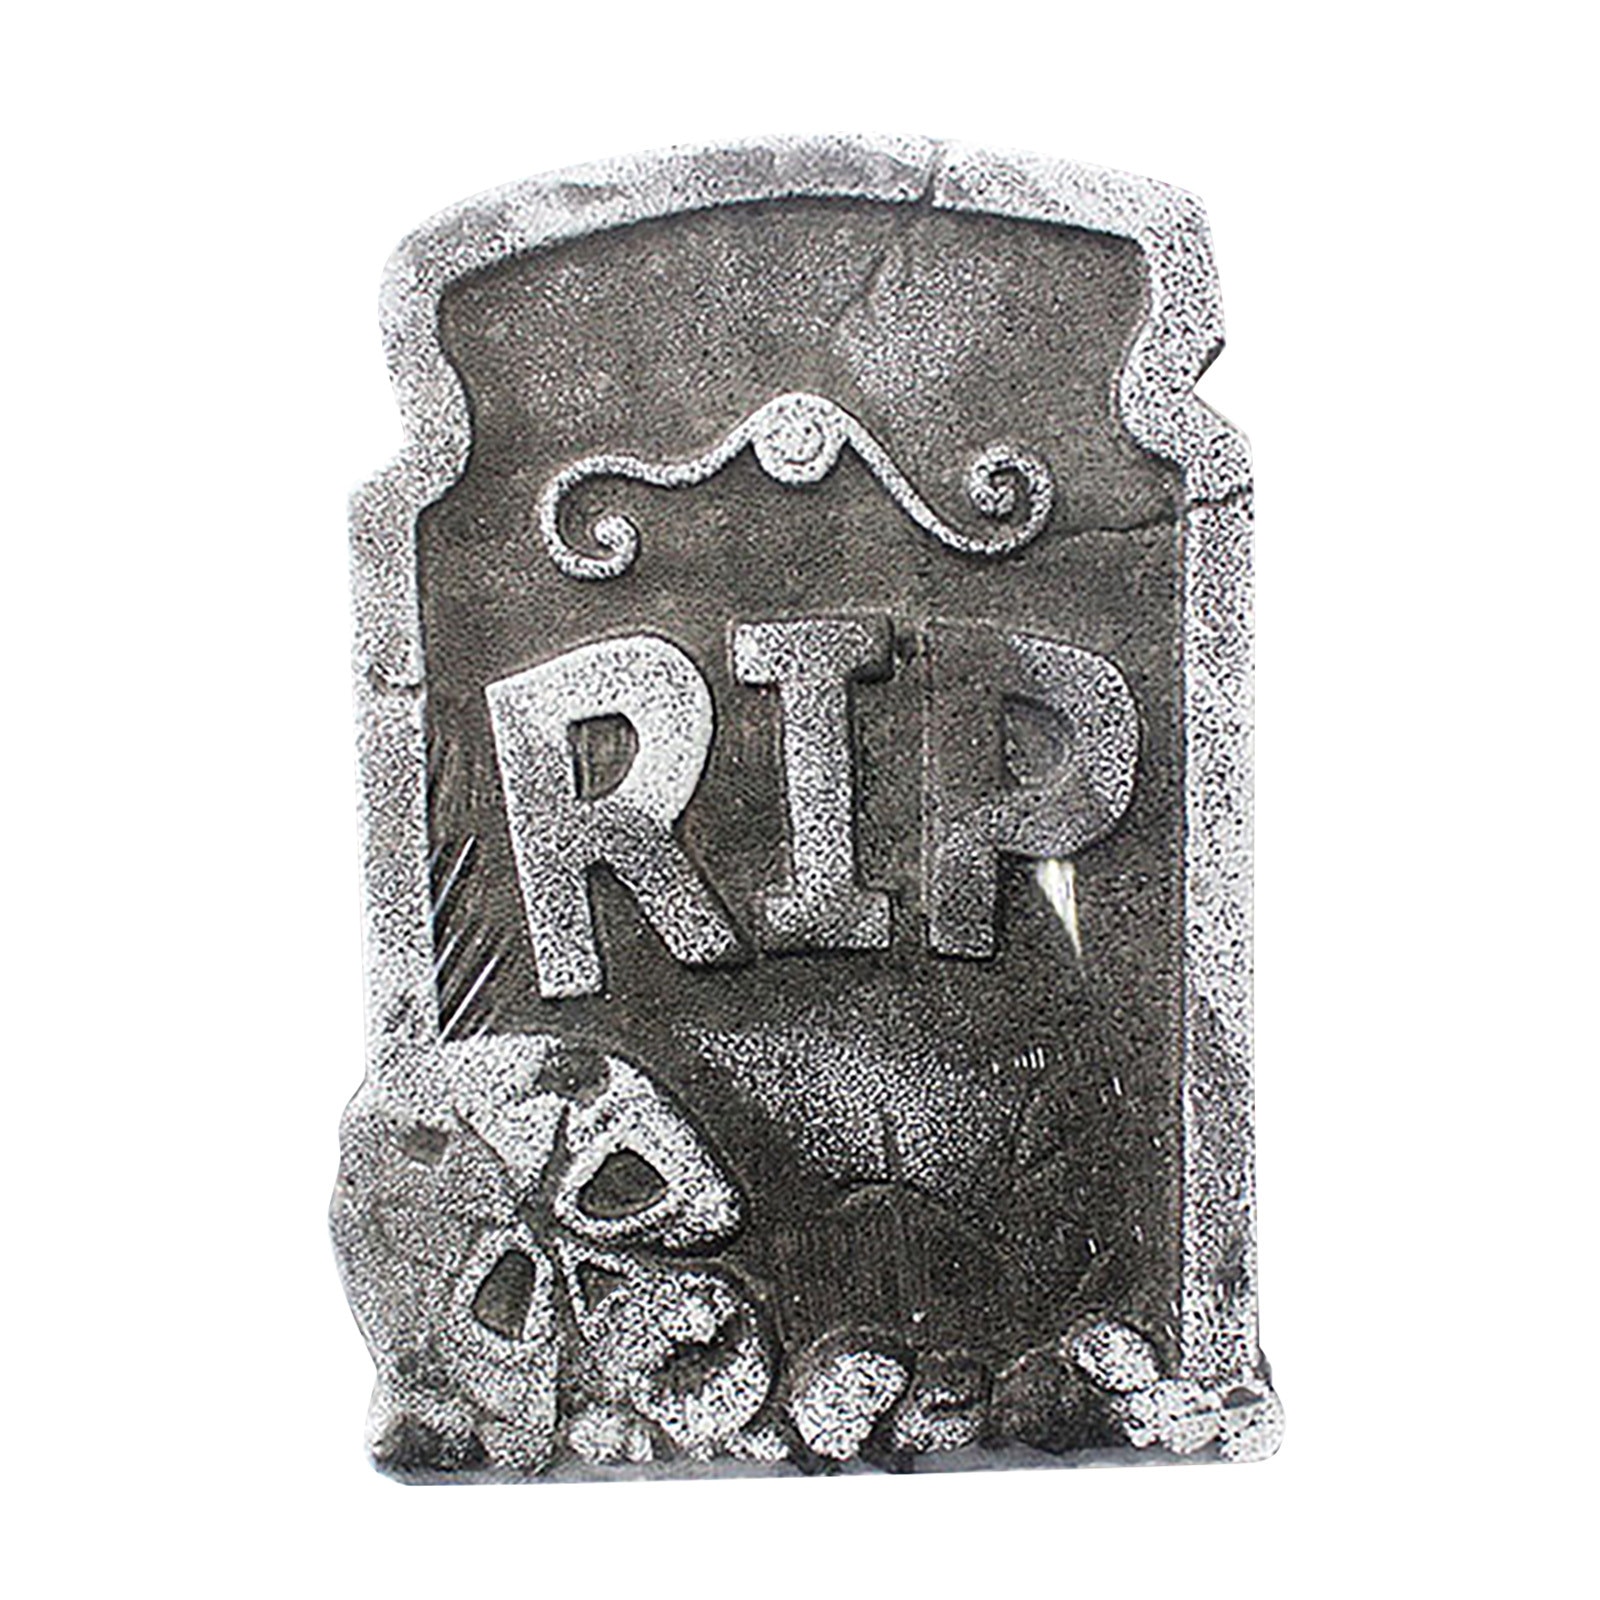 Gas Pizza Cook 1PCS Halloween Foam RIP Tombstones Halloween Yard Decorations Lawn House Decorations